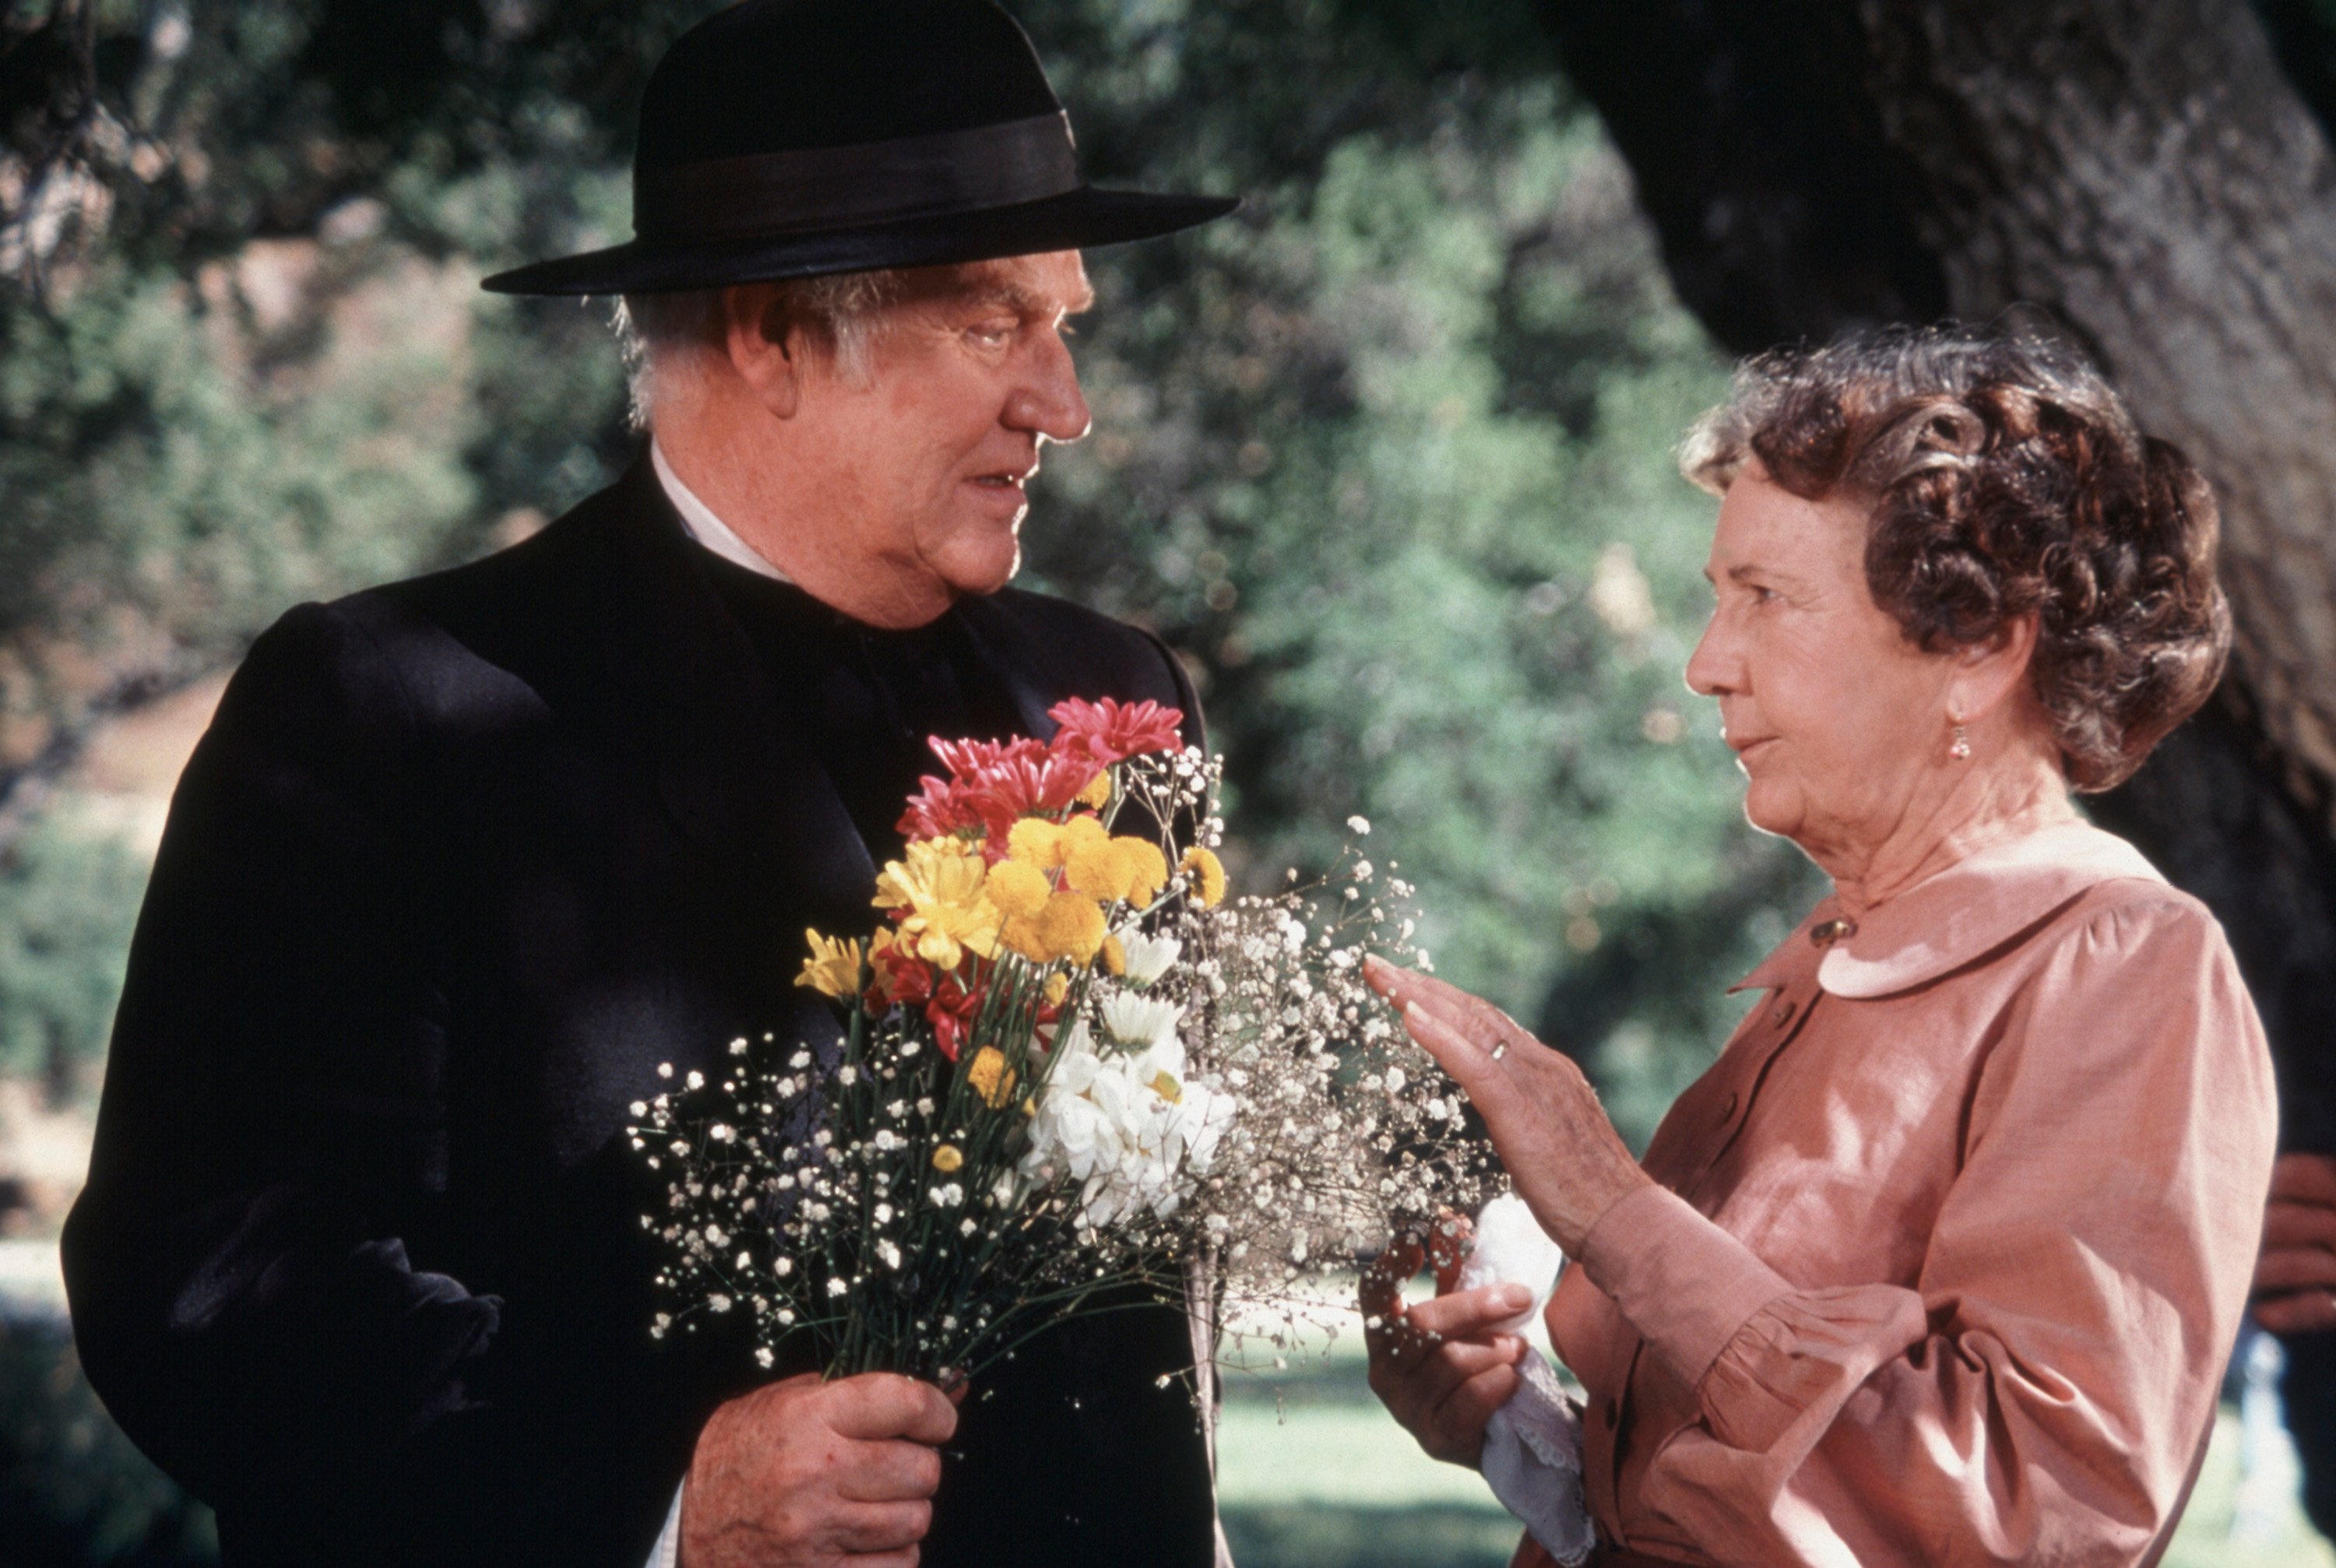 Dabbs Greer holds a bouquet of flowers and talks to a woman during an episode from Little House on the Prairie